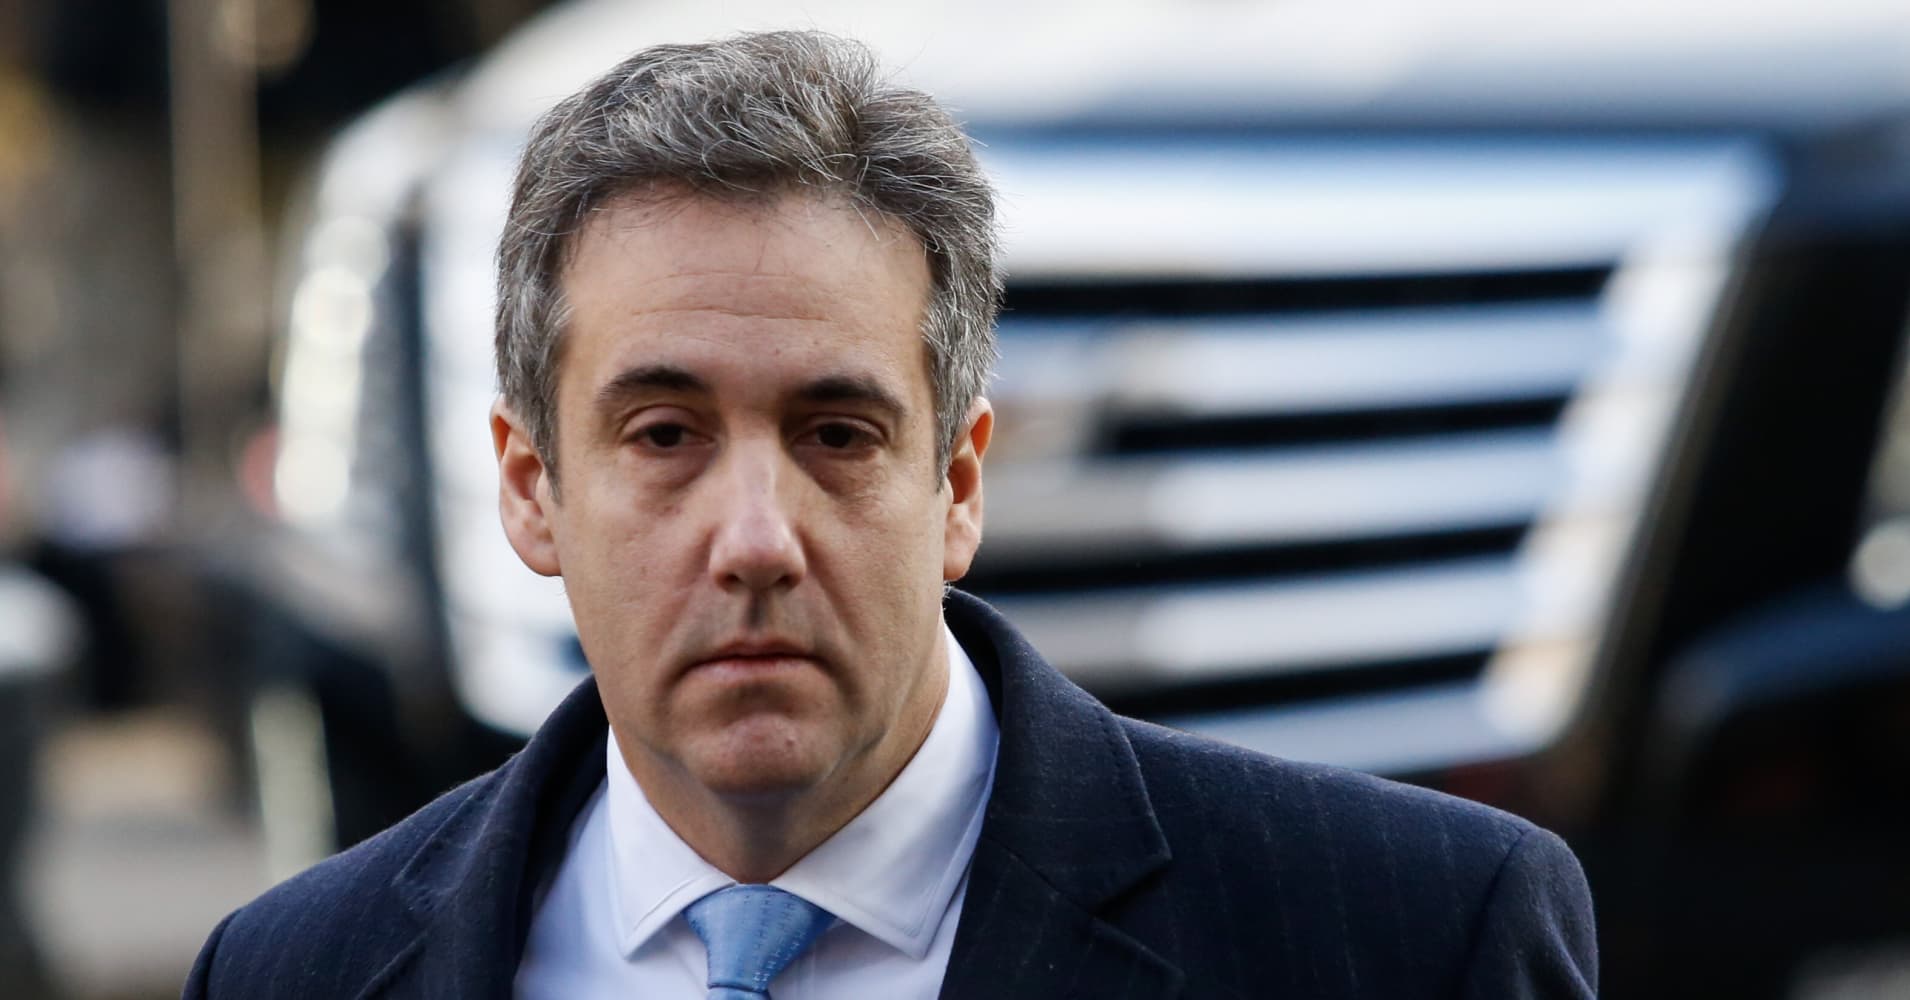 Michael Cohen: 'Of course' Trump knew hush-money payments to porn star and Playboy model were wrong